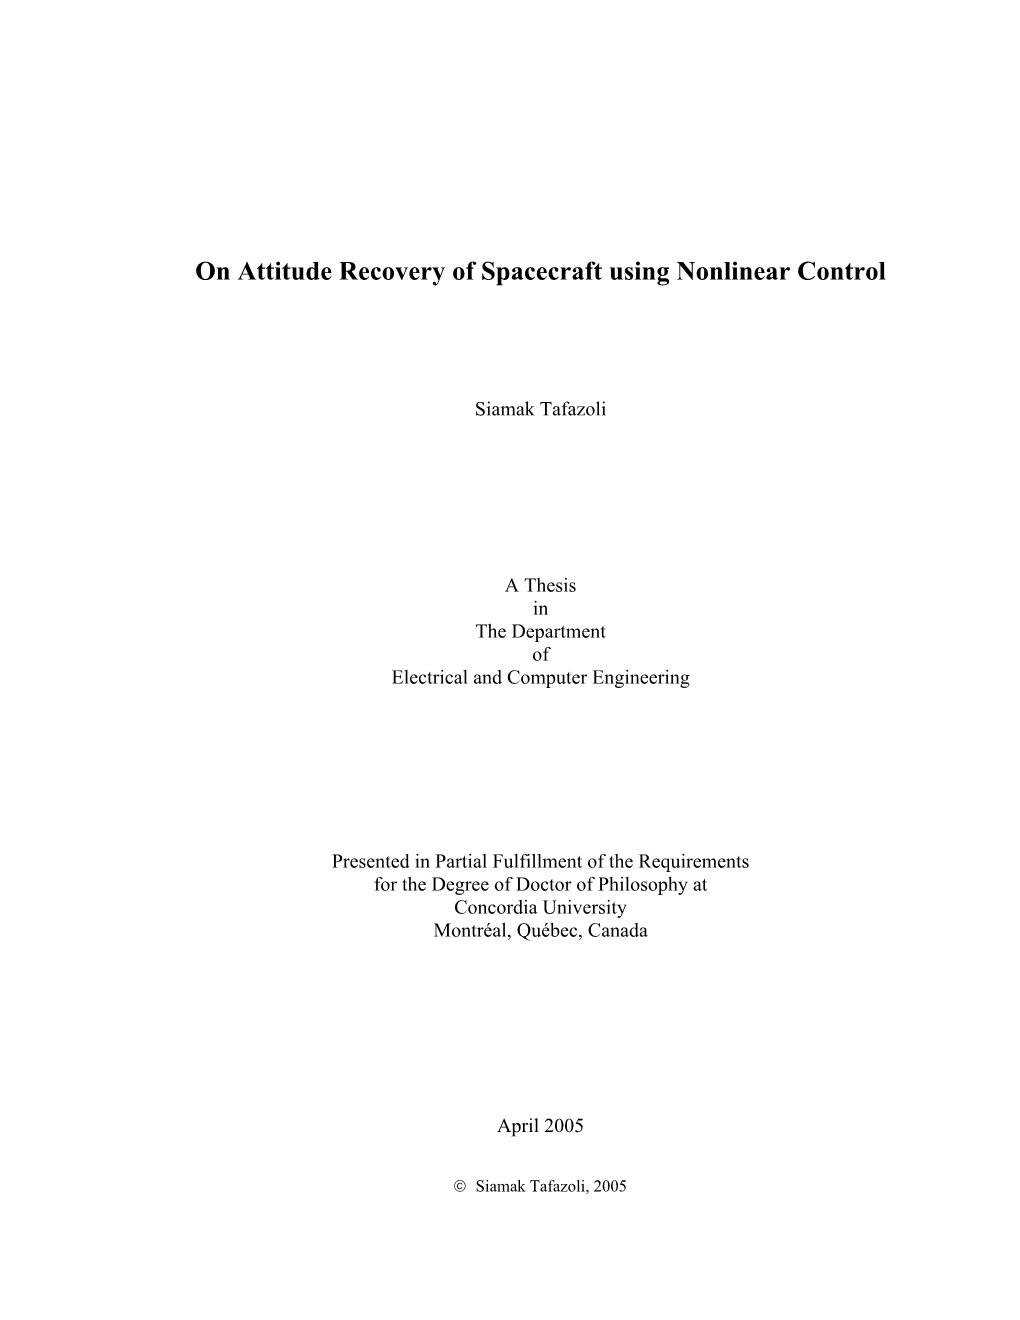 On Attitude Recovery of Spacecraft Using Nonlinear Control